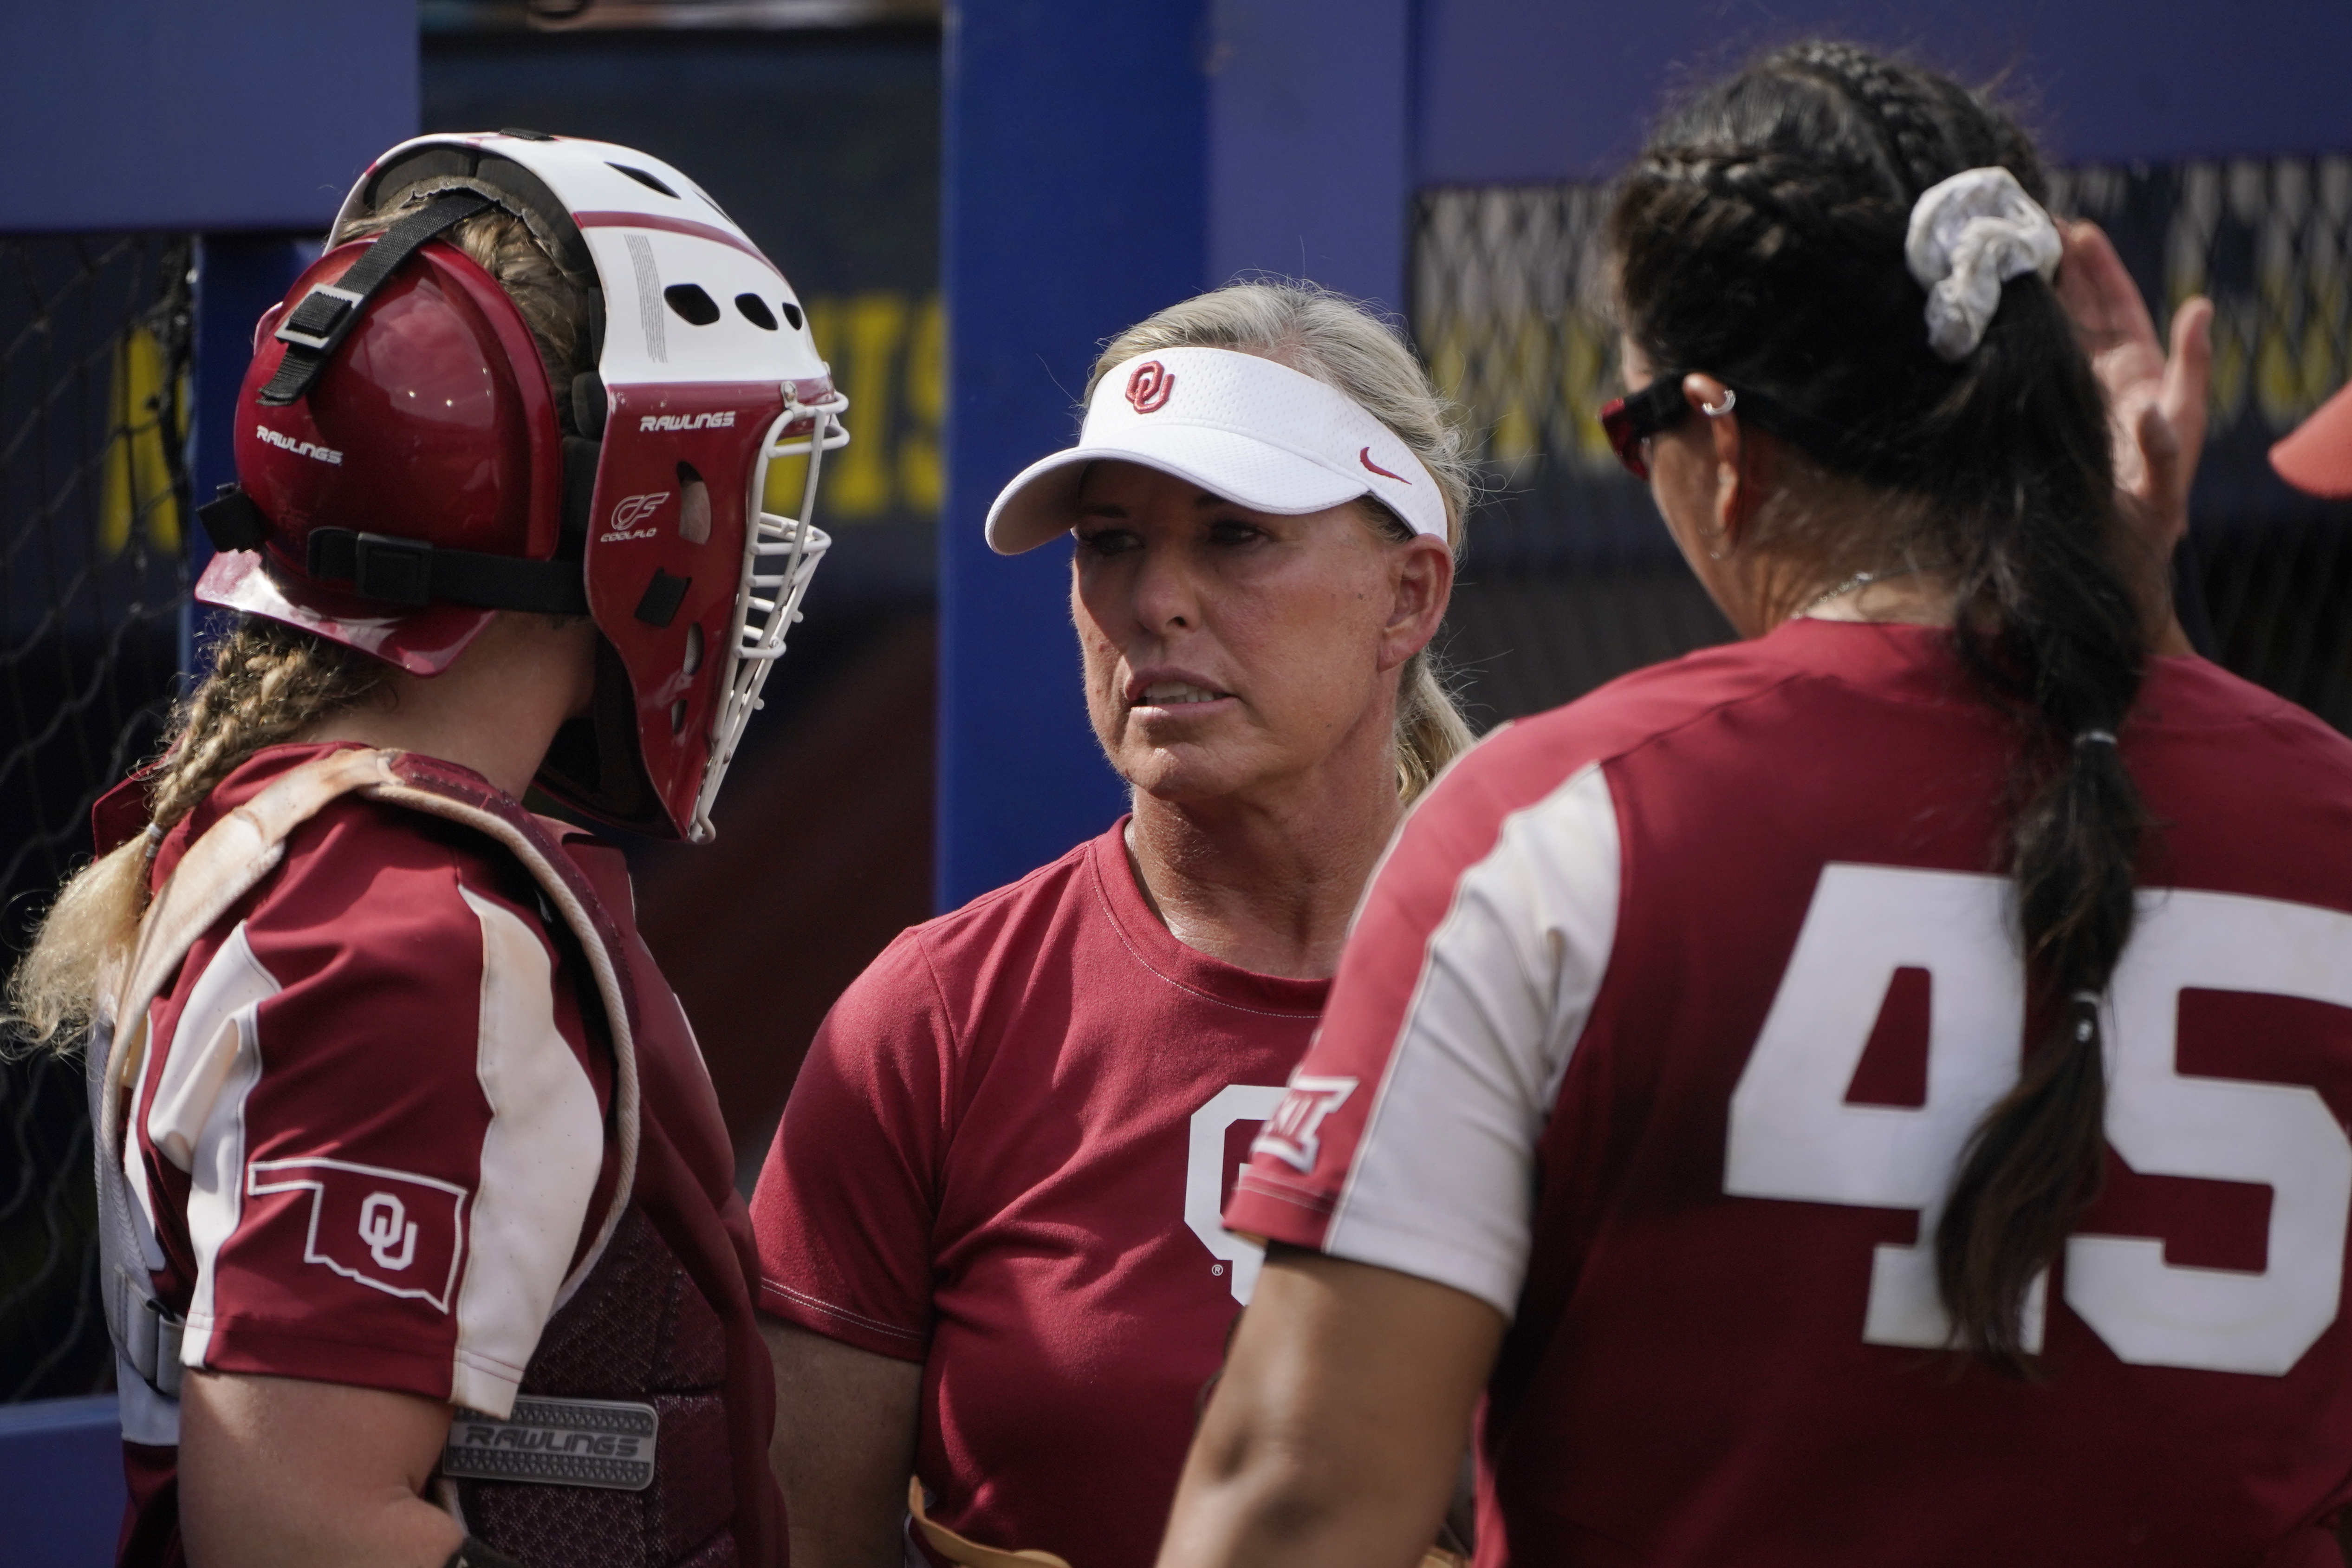 NCAA Softball - What's your favorite 𝙧𝙖𝙡𝙡𝙮 𝙘𝙖𝙥 and/or